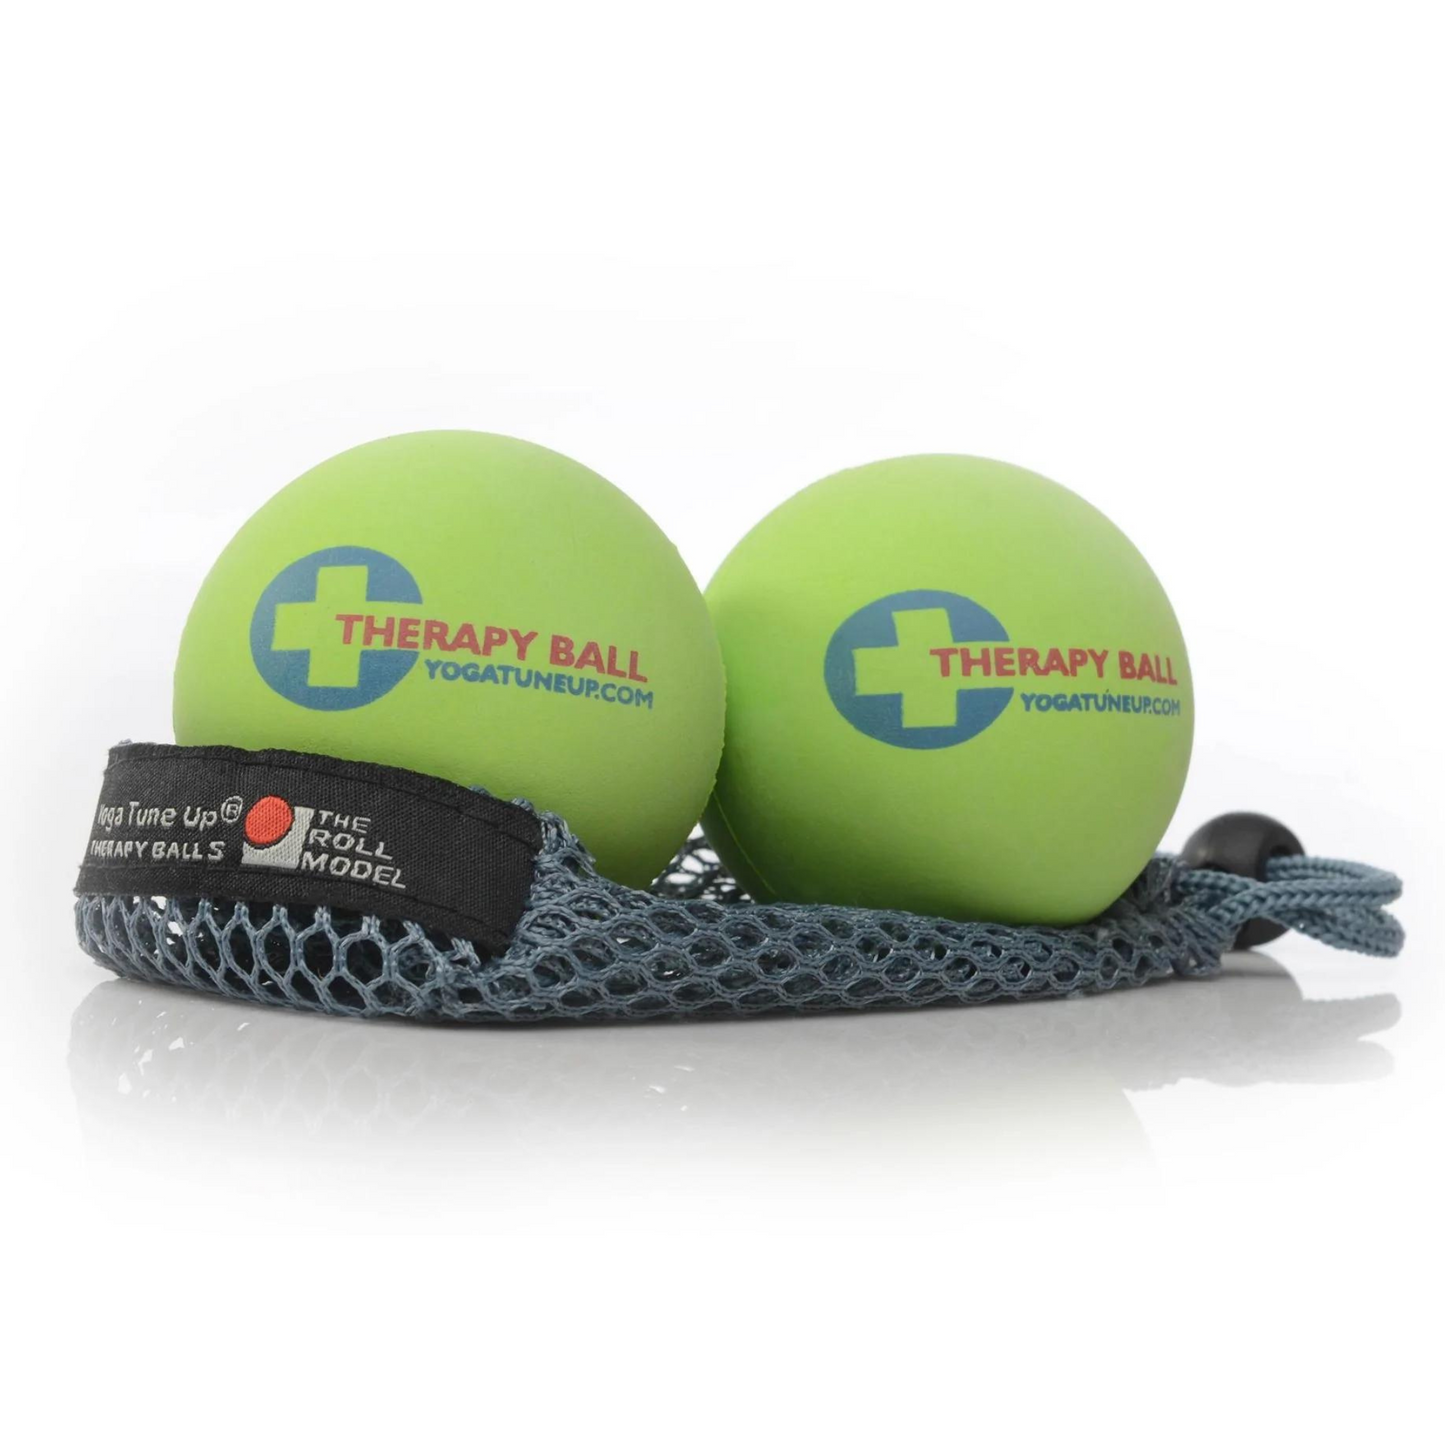 two lime green therapy balls that read "Therapy Ball yogatuneup.com" sitting on a grey mess carrying bag